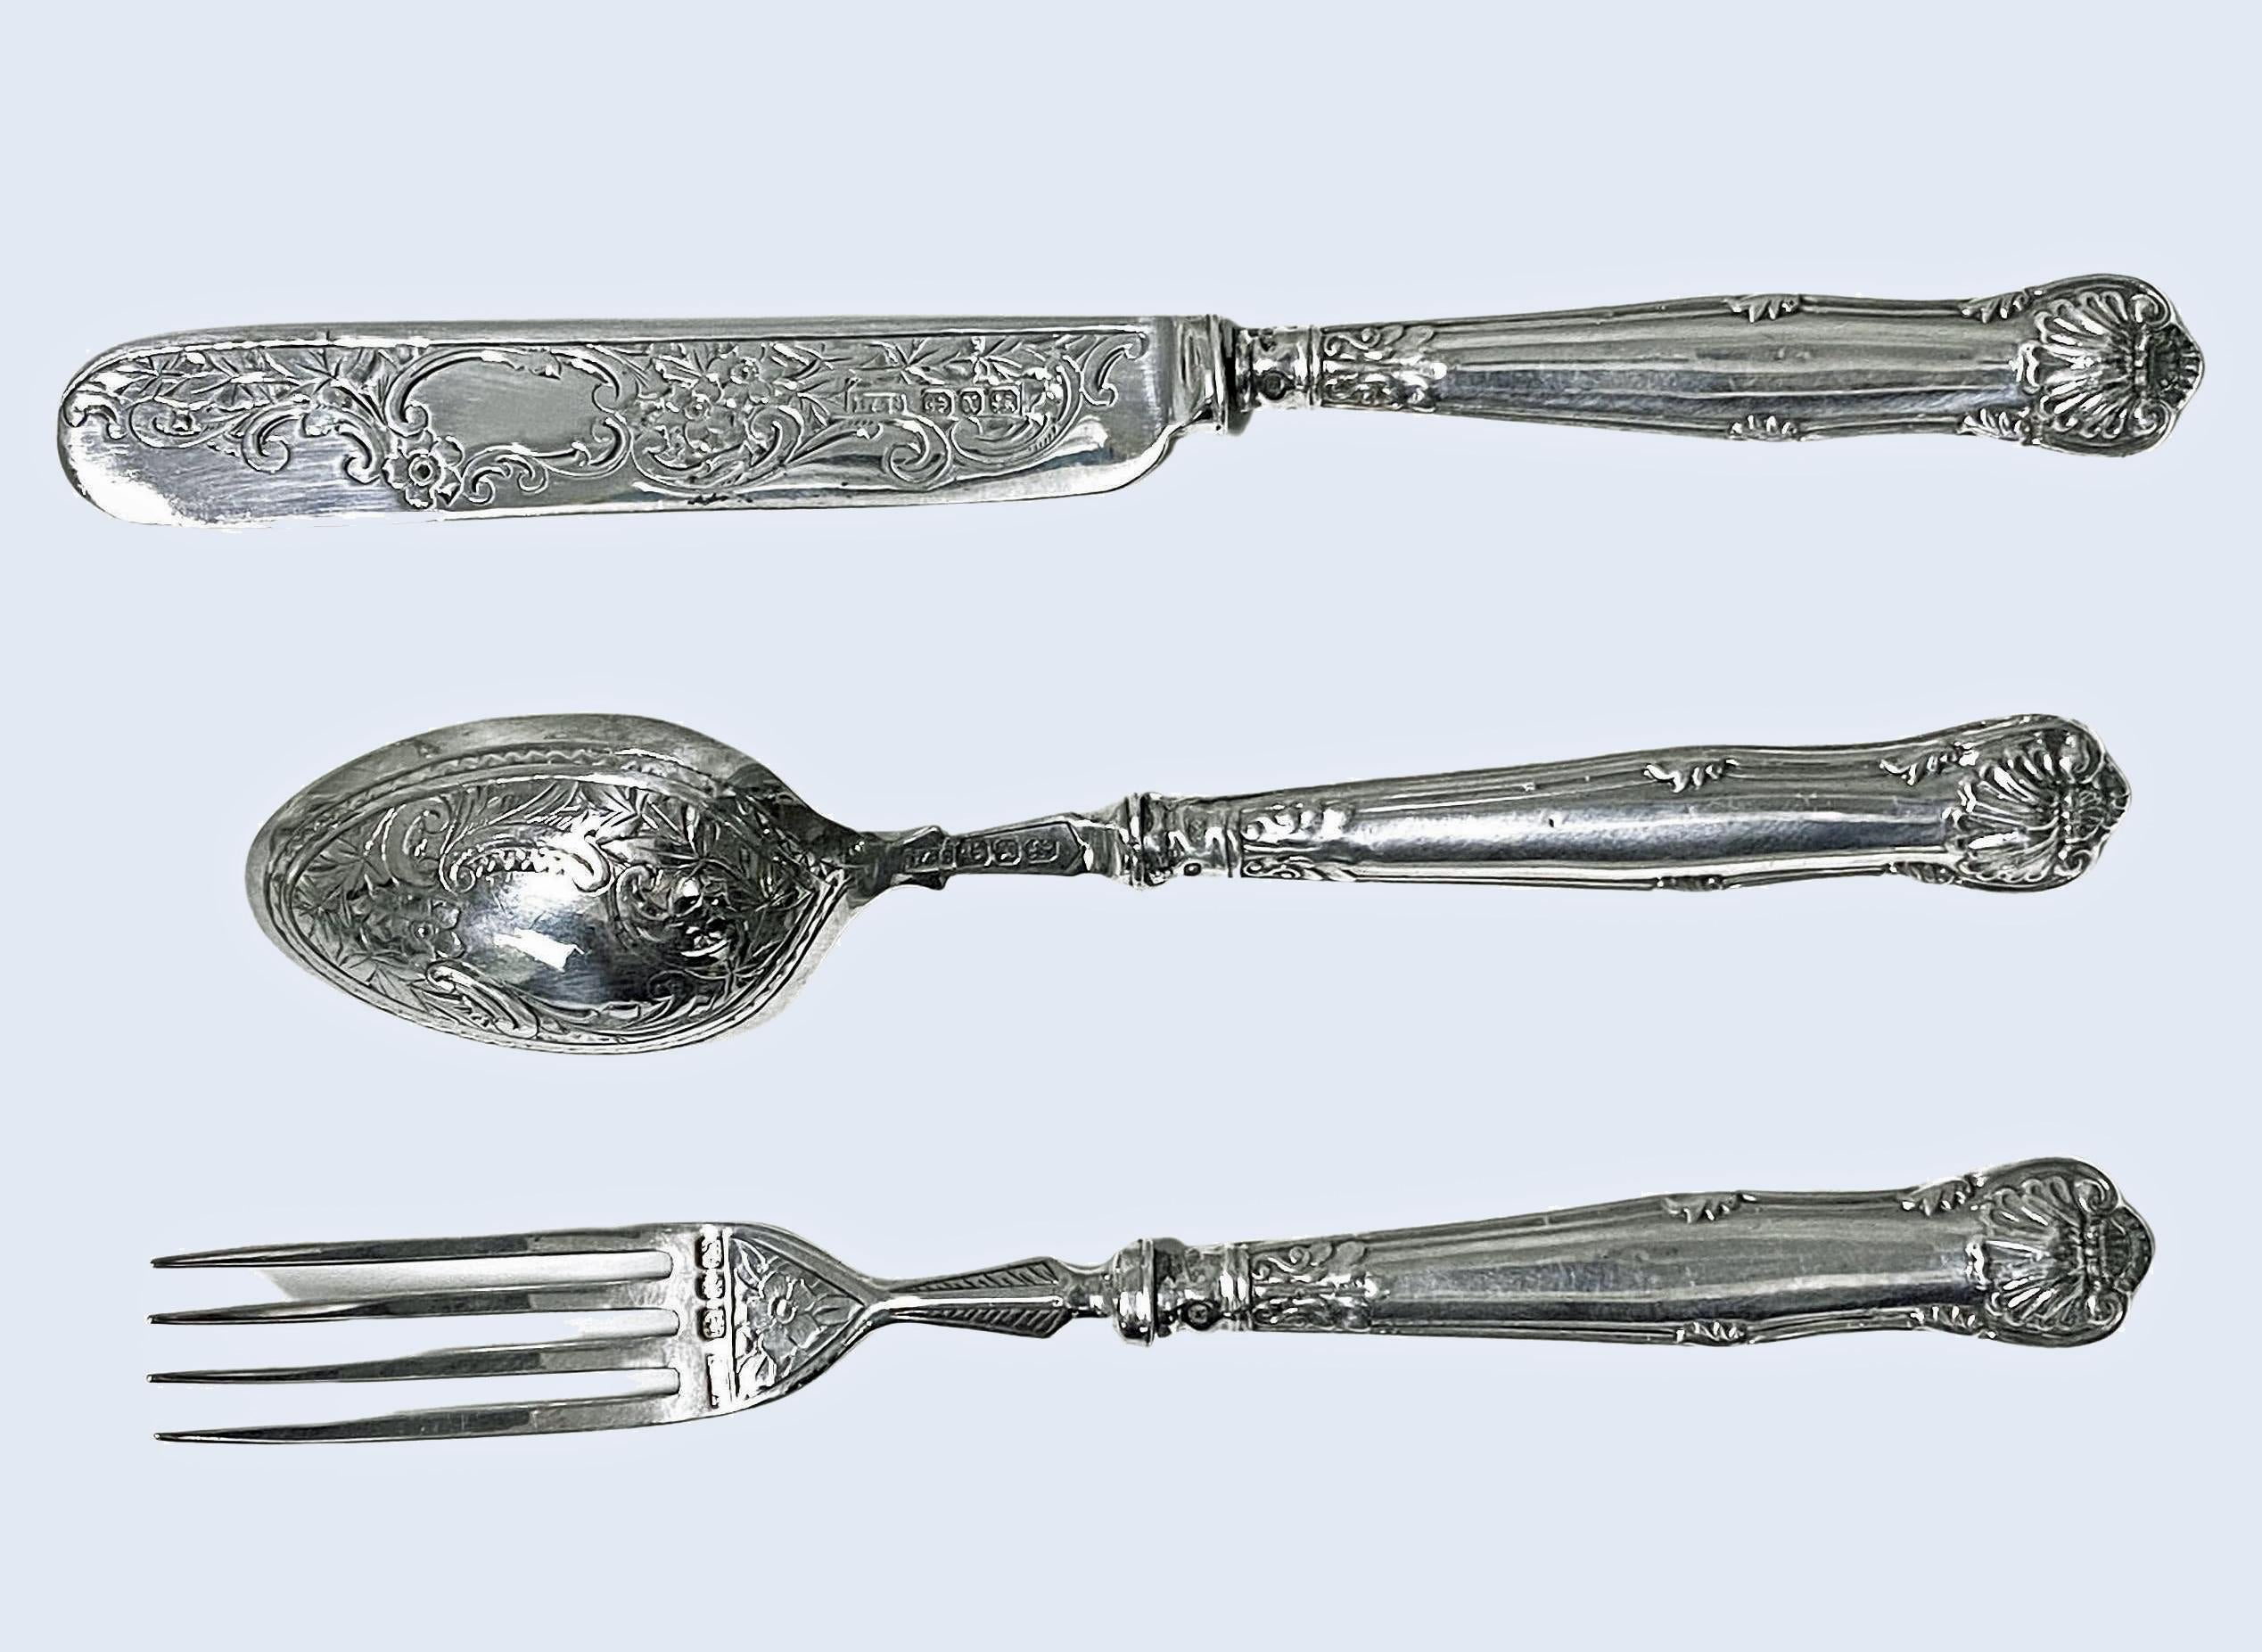 Antique Silver Child’s Youth Christening or Travelling Set, Birmingham 1897 Levi and Salaman. Full hallmarks to blades and handles. Length: knife 6.40 inches, spoon 5.50 inches and fork 5.75 inches. Nice, engraved decoration, no monograms. 